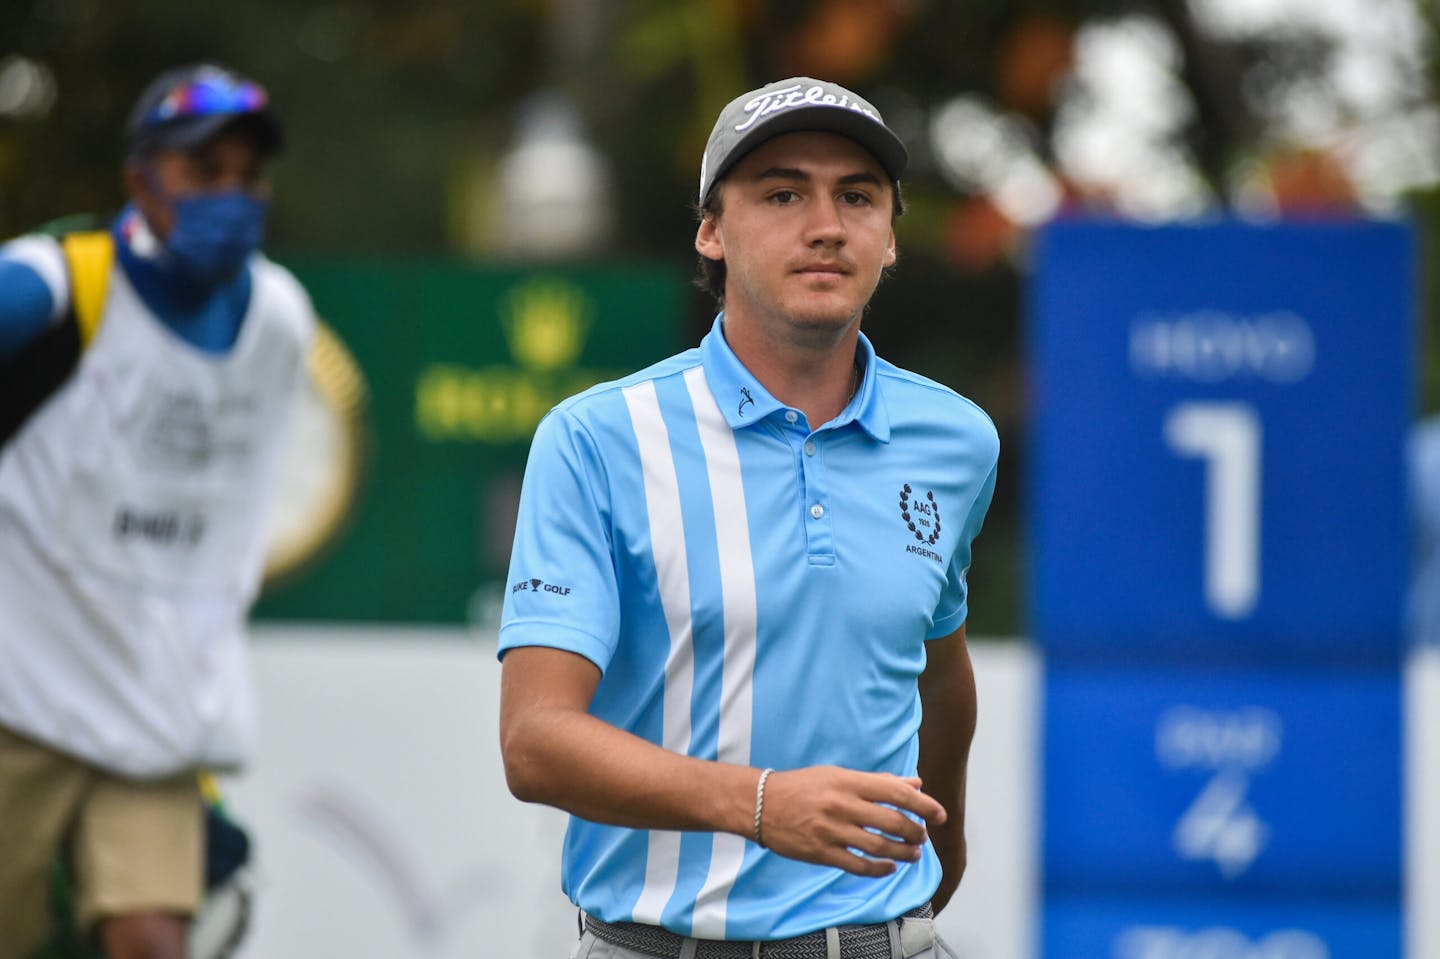 La Romana, DOMINICAN REPUBLIC: Vicente Marzilio of Argentina pictured at the 2022 Latin America Amateur Championship at Casa de Campo Resort during Final Round on January 23rd, 2022.